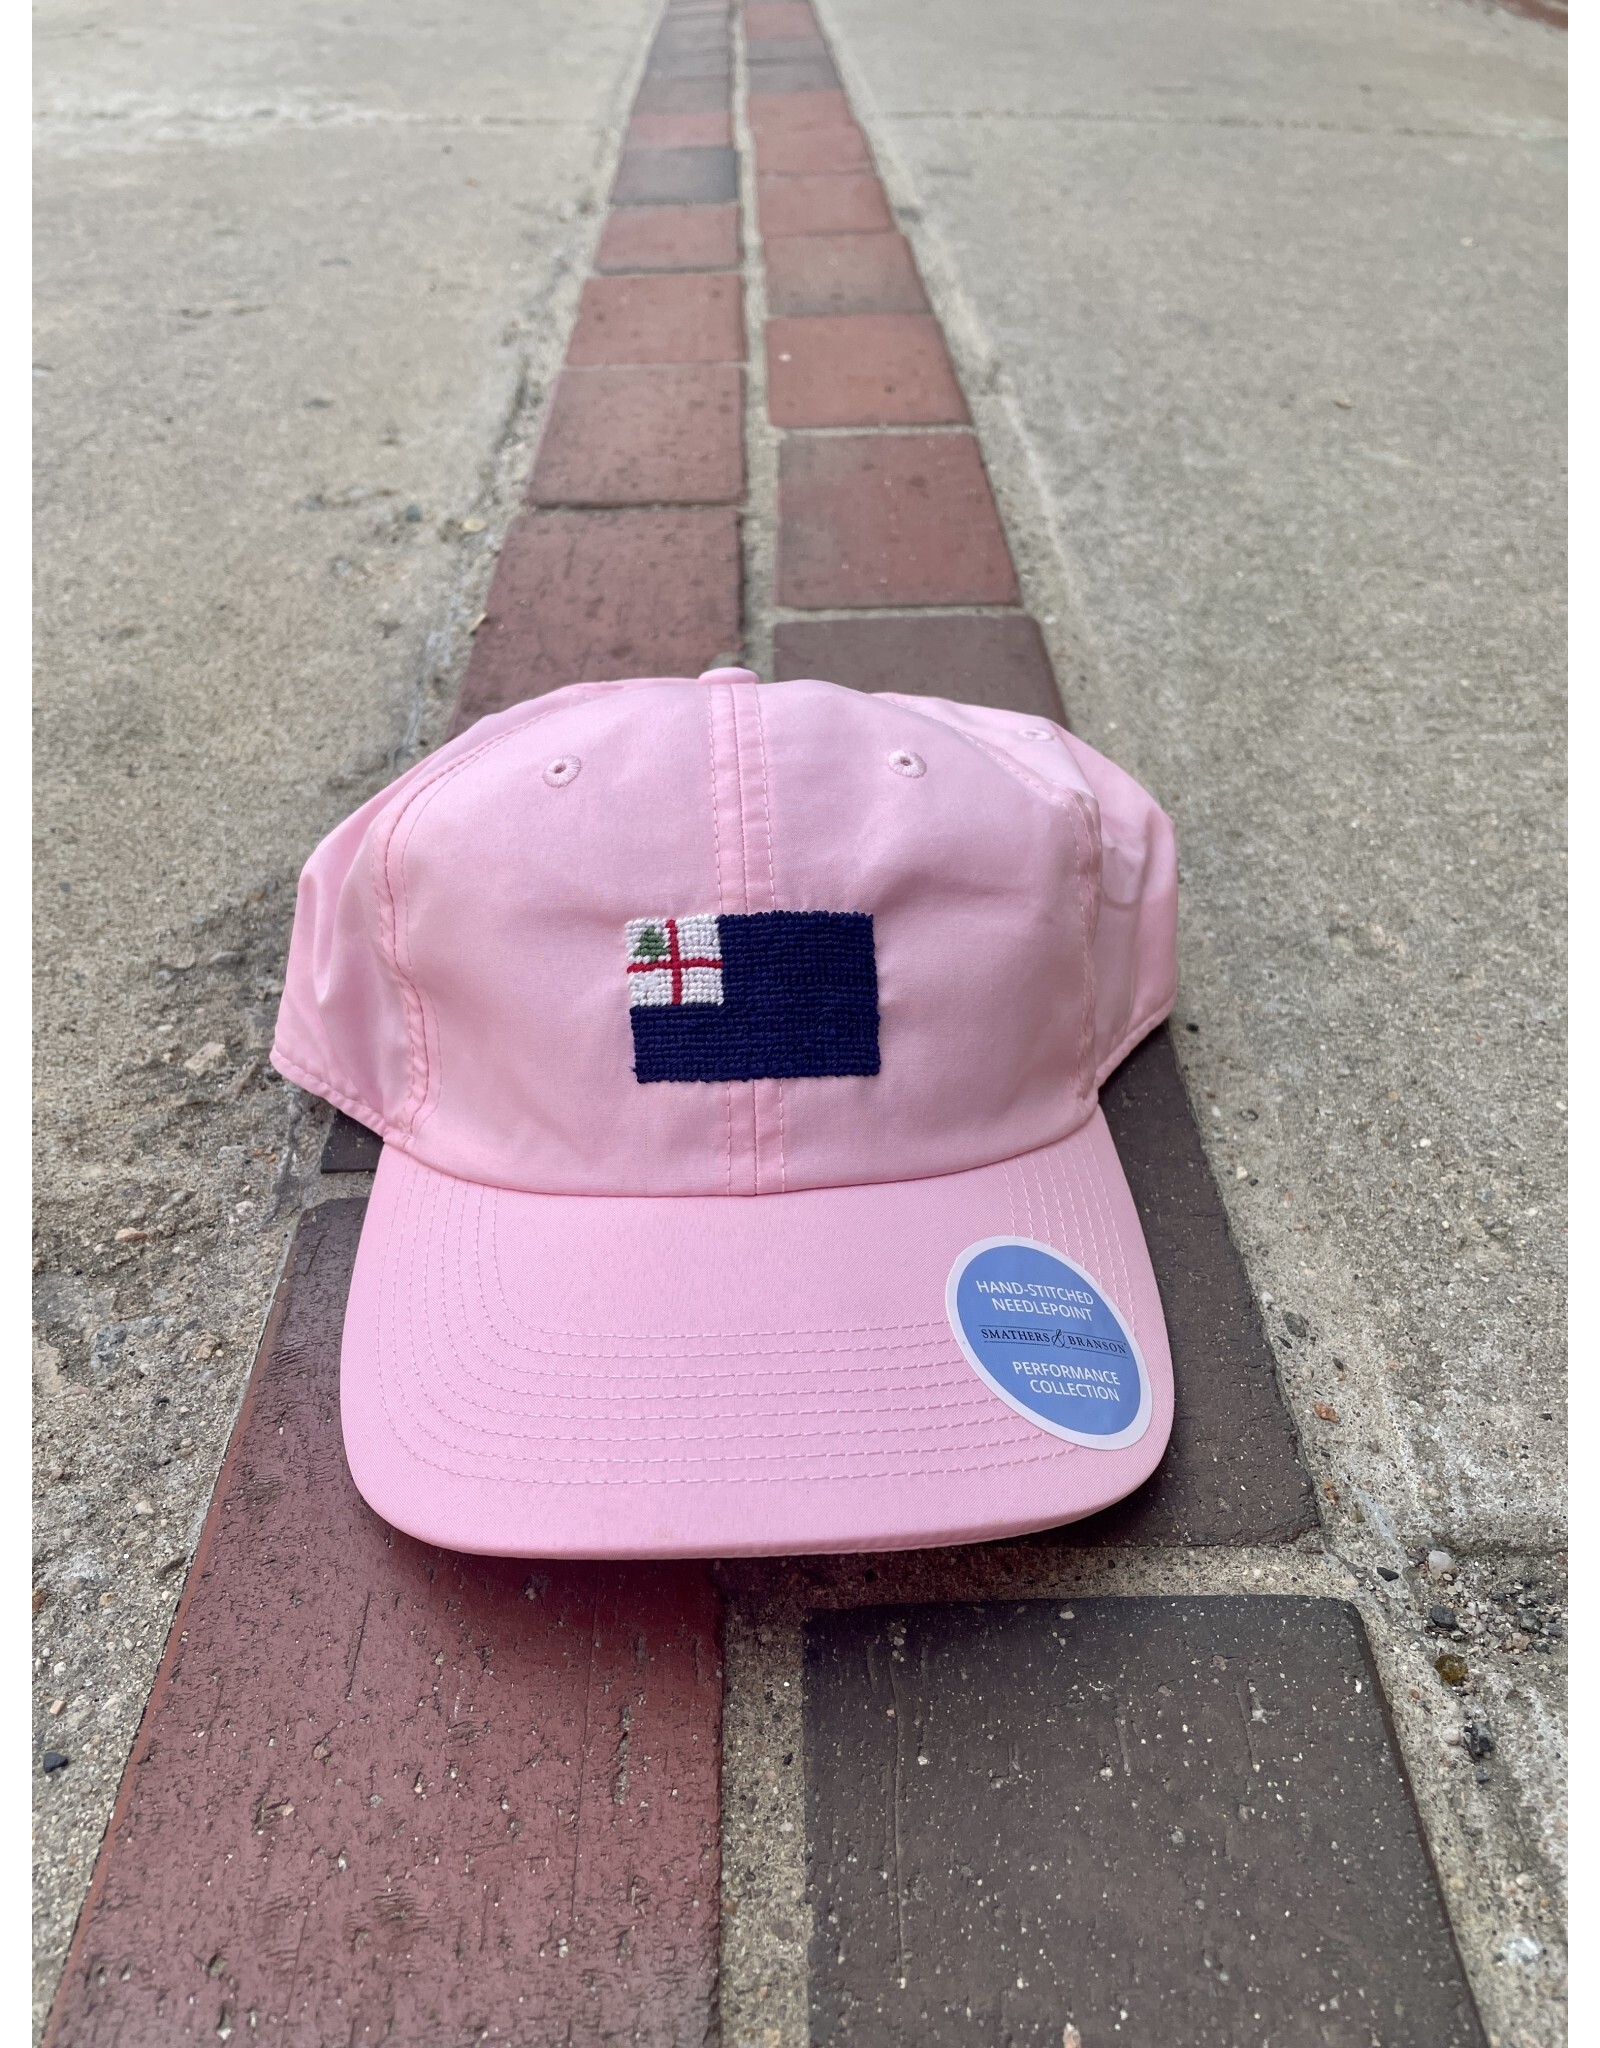 Cherry Blossom Performance Flag Hat - Place and Gather